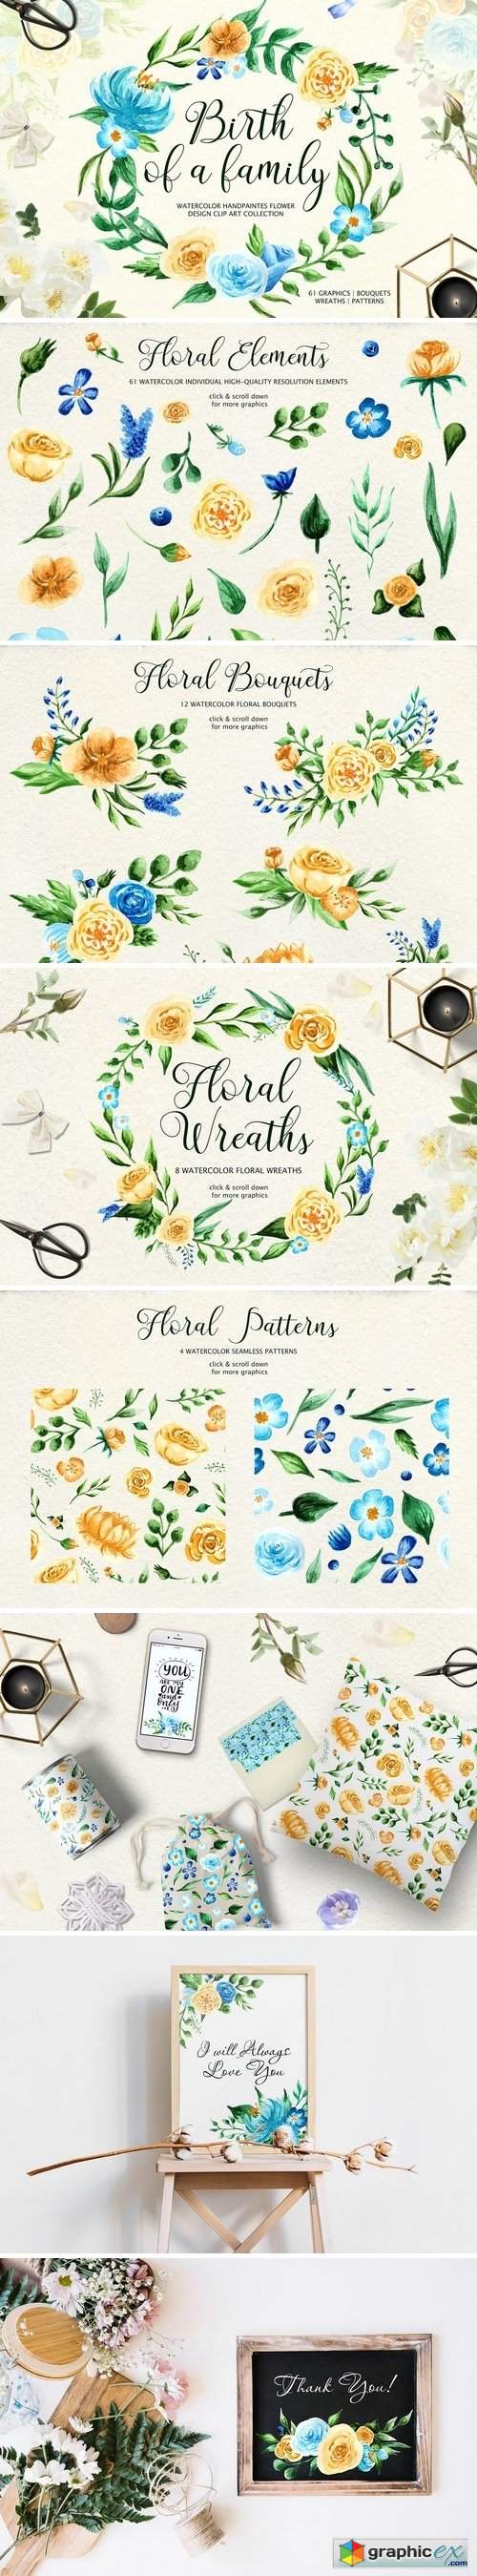 Birth of Watercolor Flower Set